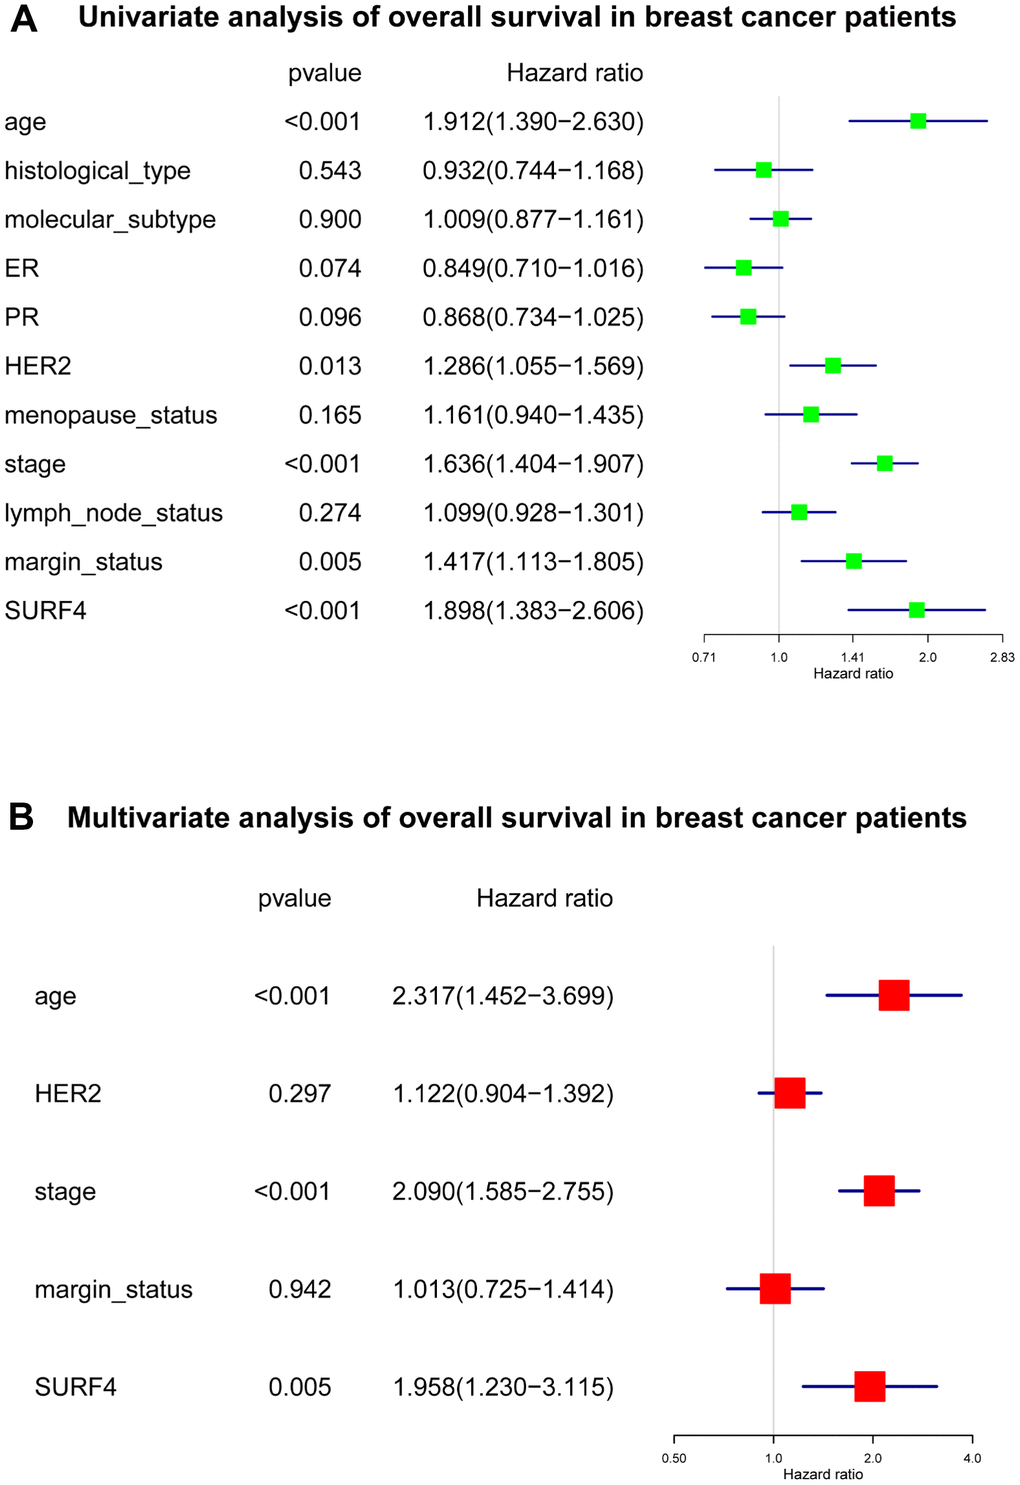 Forest plot of Cox regression analysis about SURF4 and OS. (A) Univariate analysis of OS in breast cancer patients. (B) Multivariate analysis of OS in breast cancer patients.